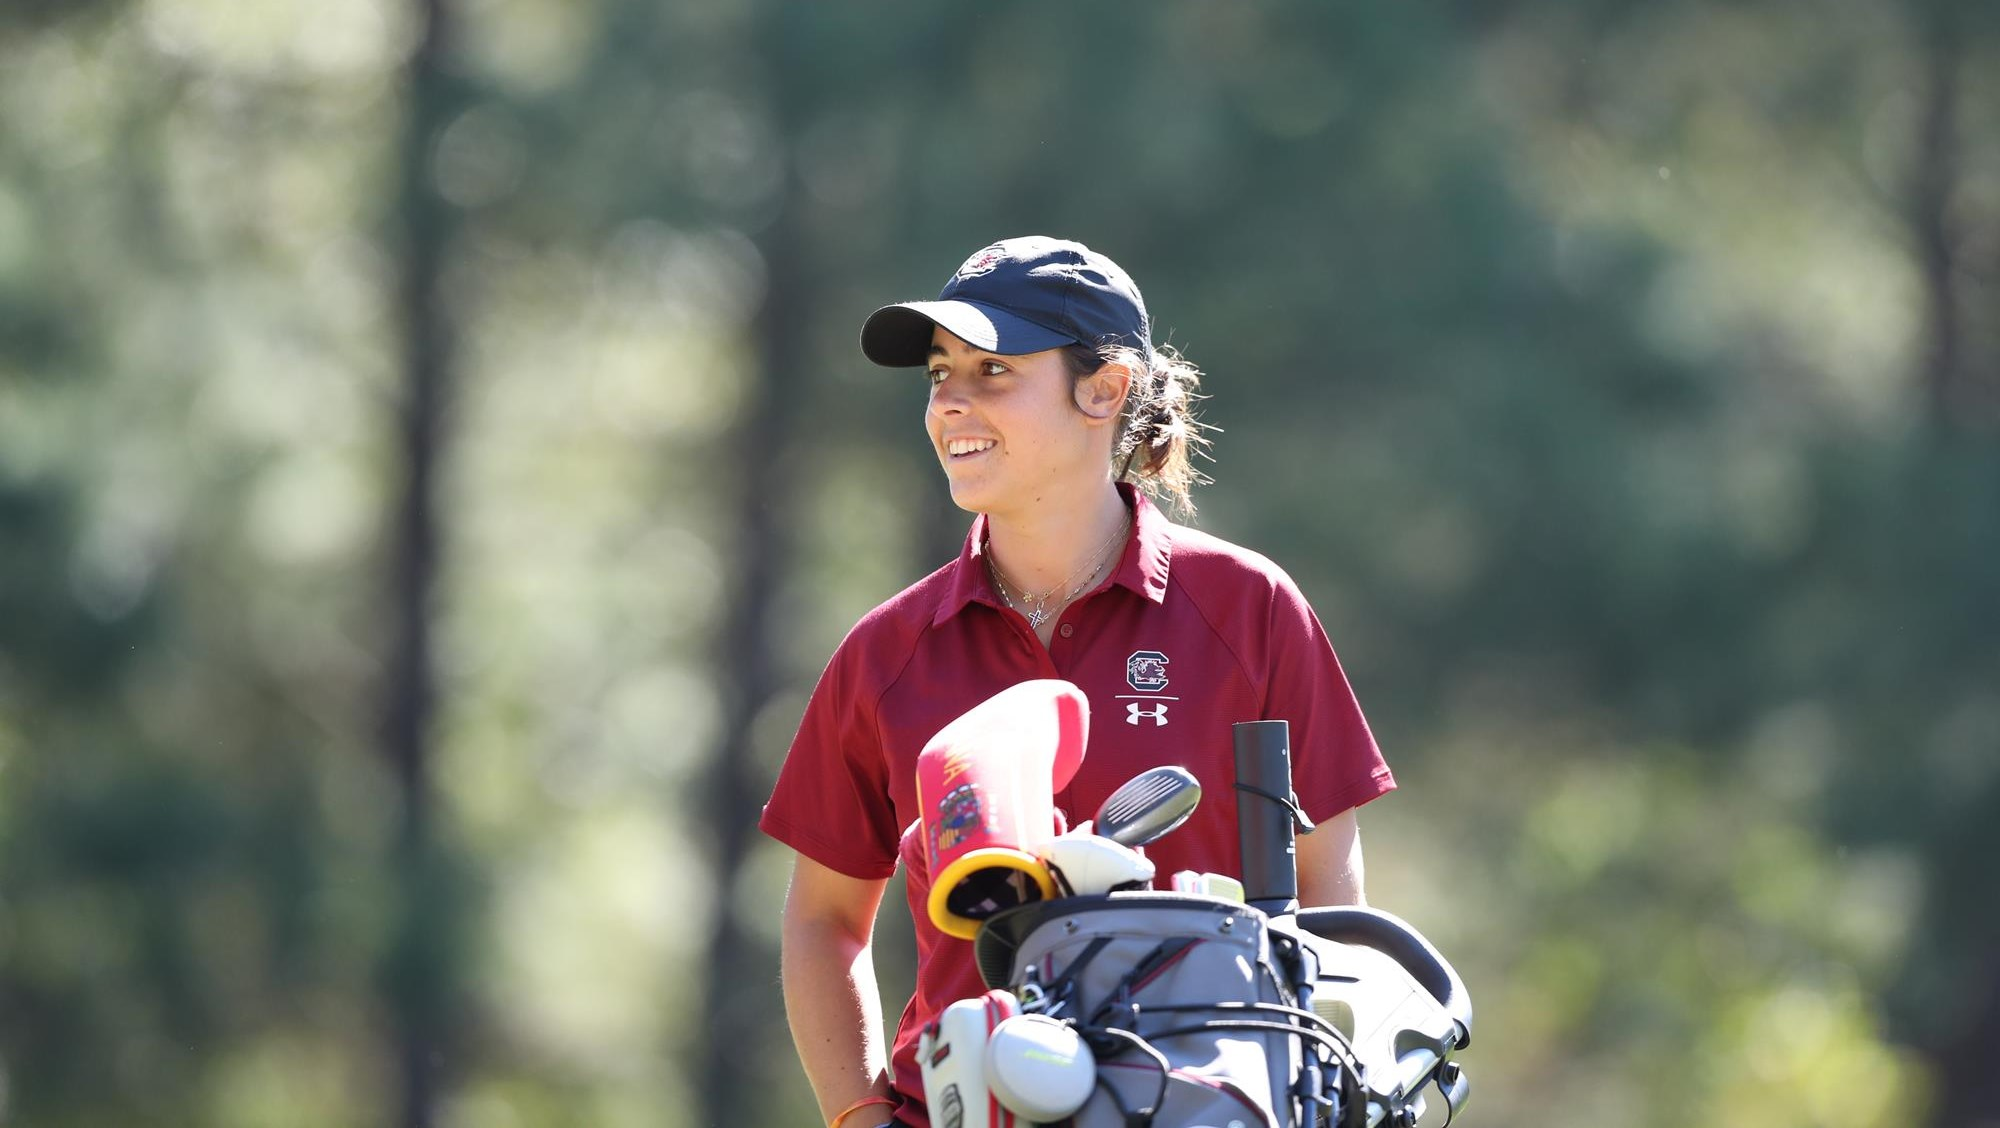 Gamecocks in Fifth After Second Round in New Orleans